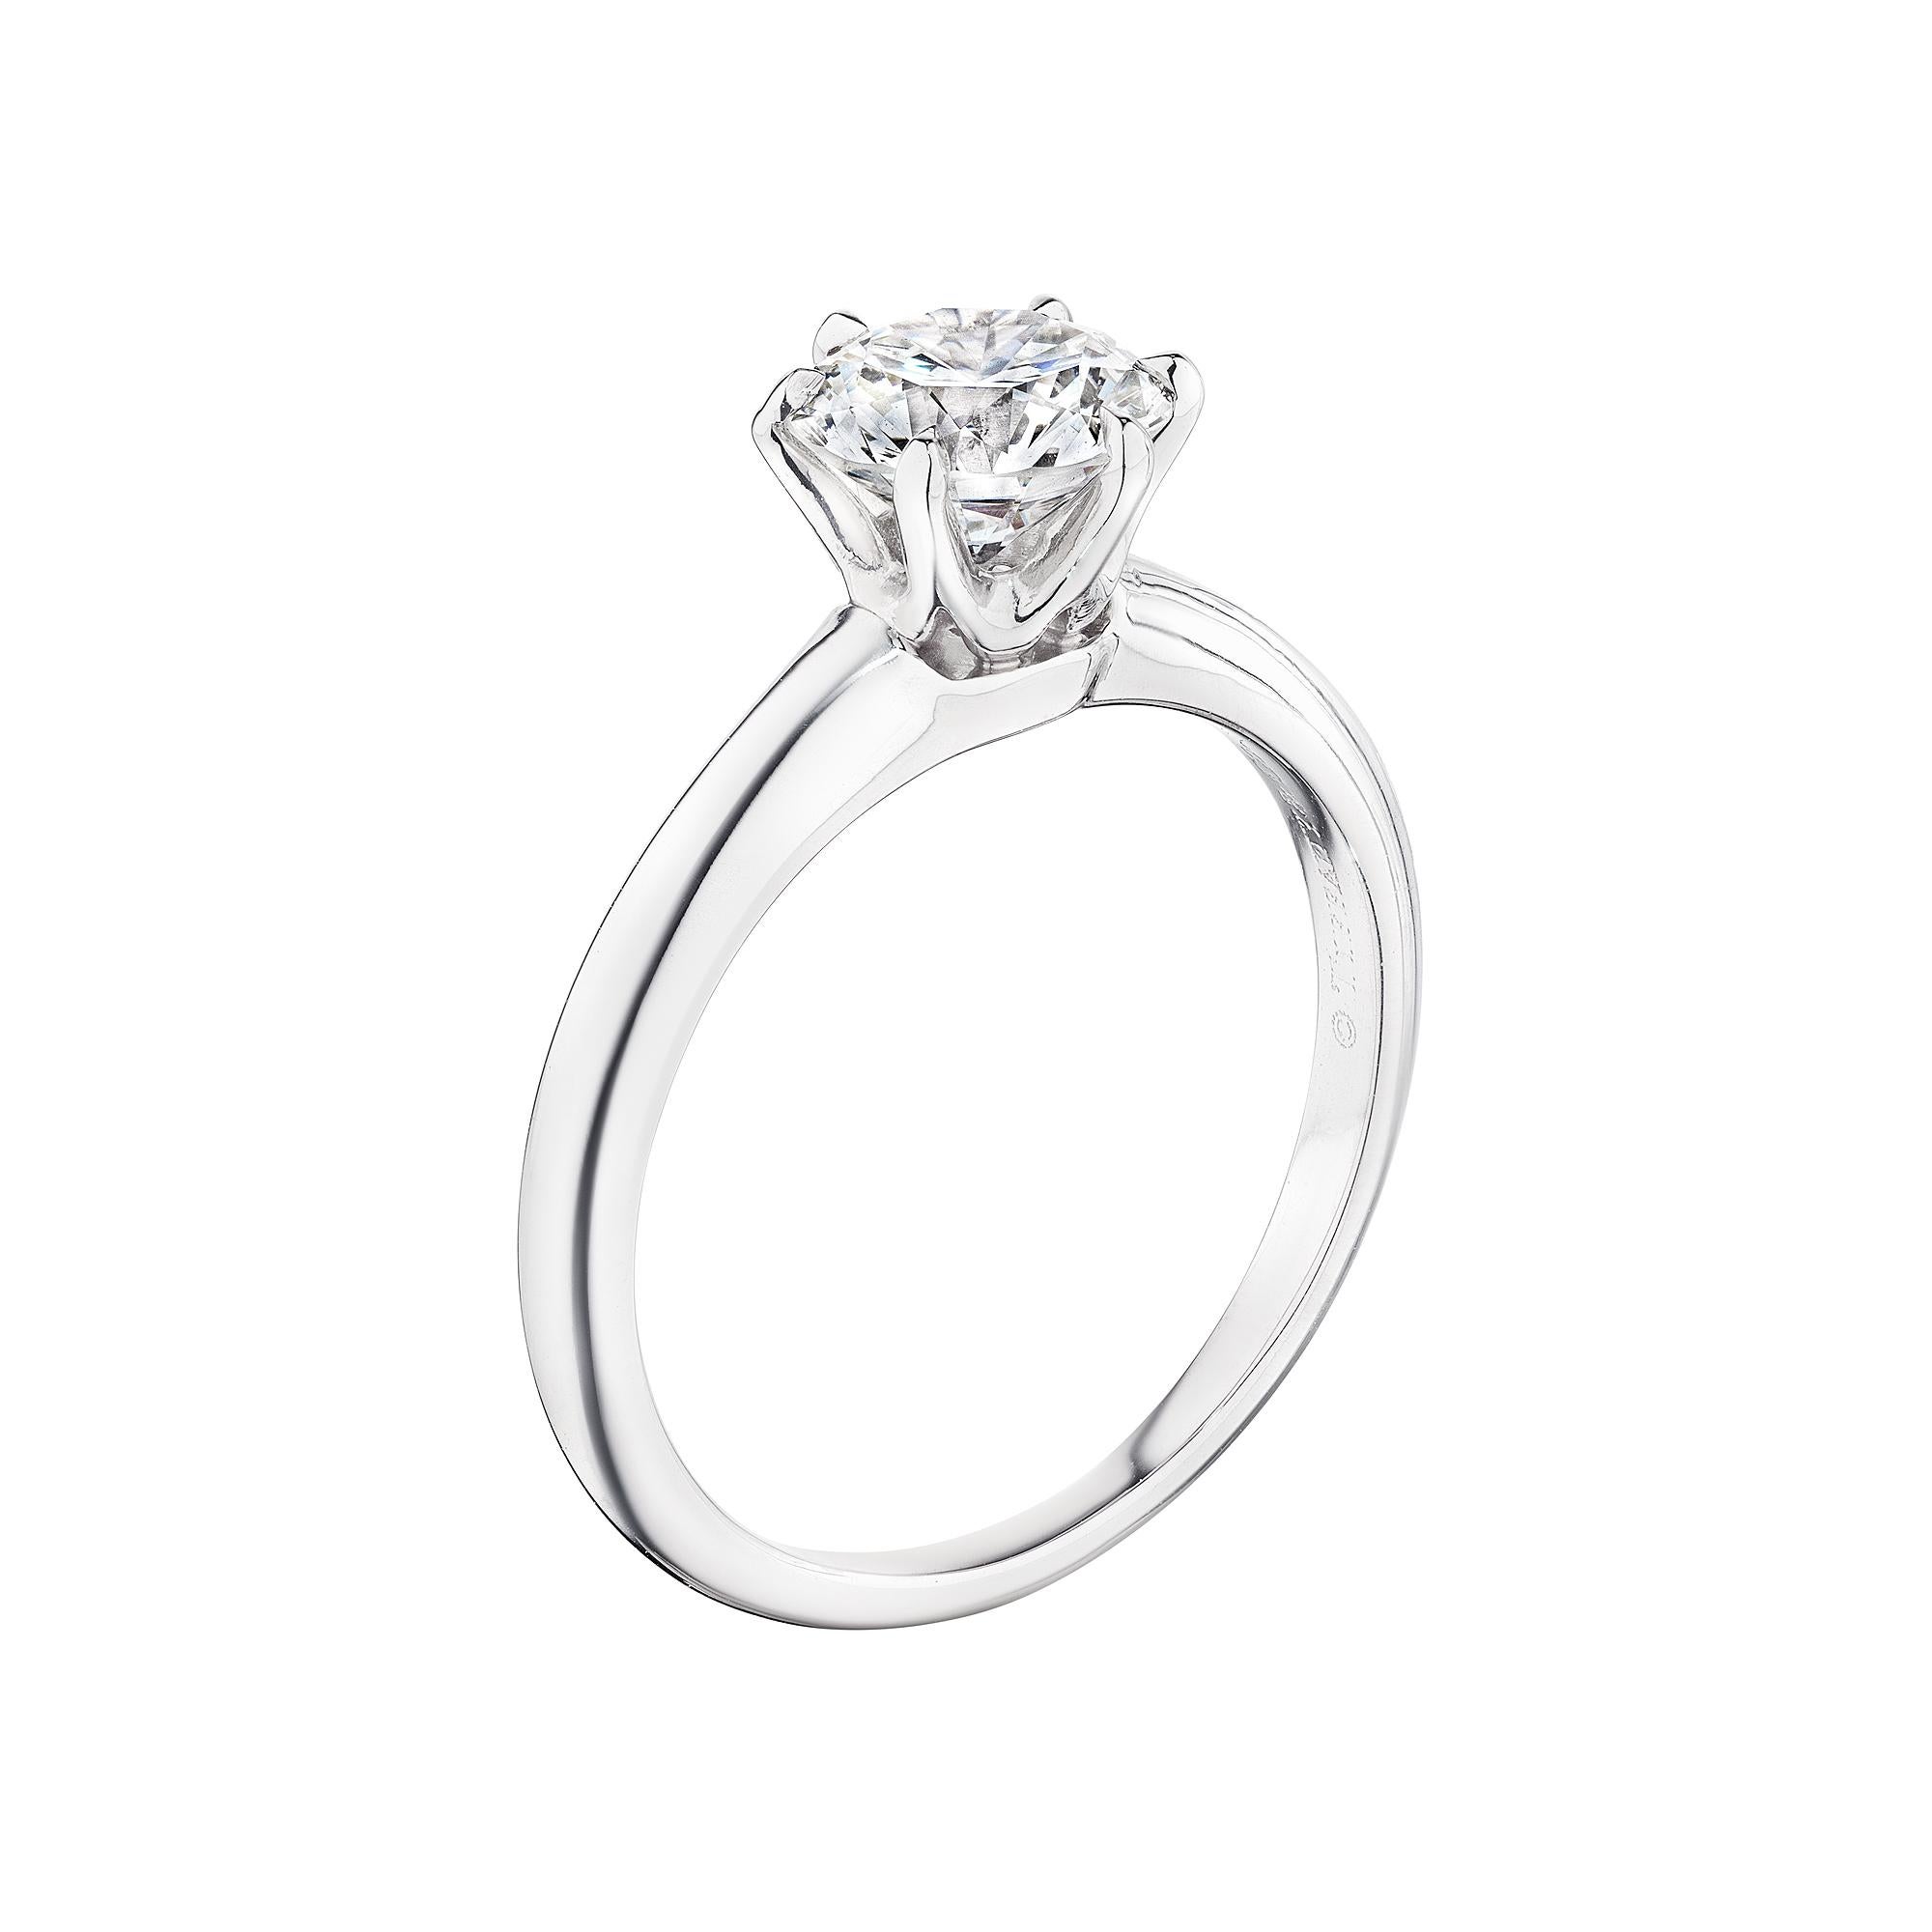 Simply luminous.  This Tiffany & Co. 1.12 round brilliant cut diamond platinum GIA certified engagement ring shines above all others.  Signed Tiffany & Co.  Circa 2003.  Diamond color H.  Clarity VS2.  GIA certification number 12912357.  Tiffany &